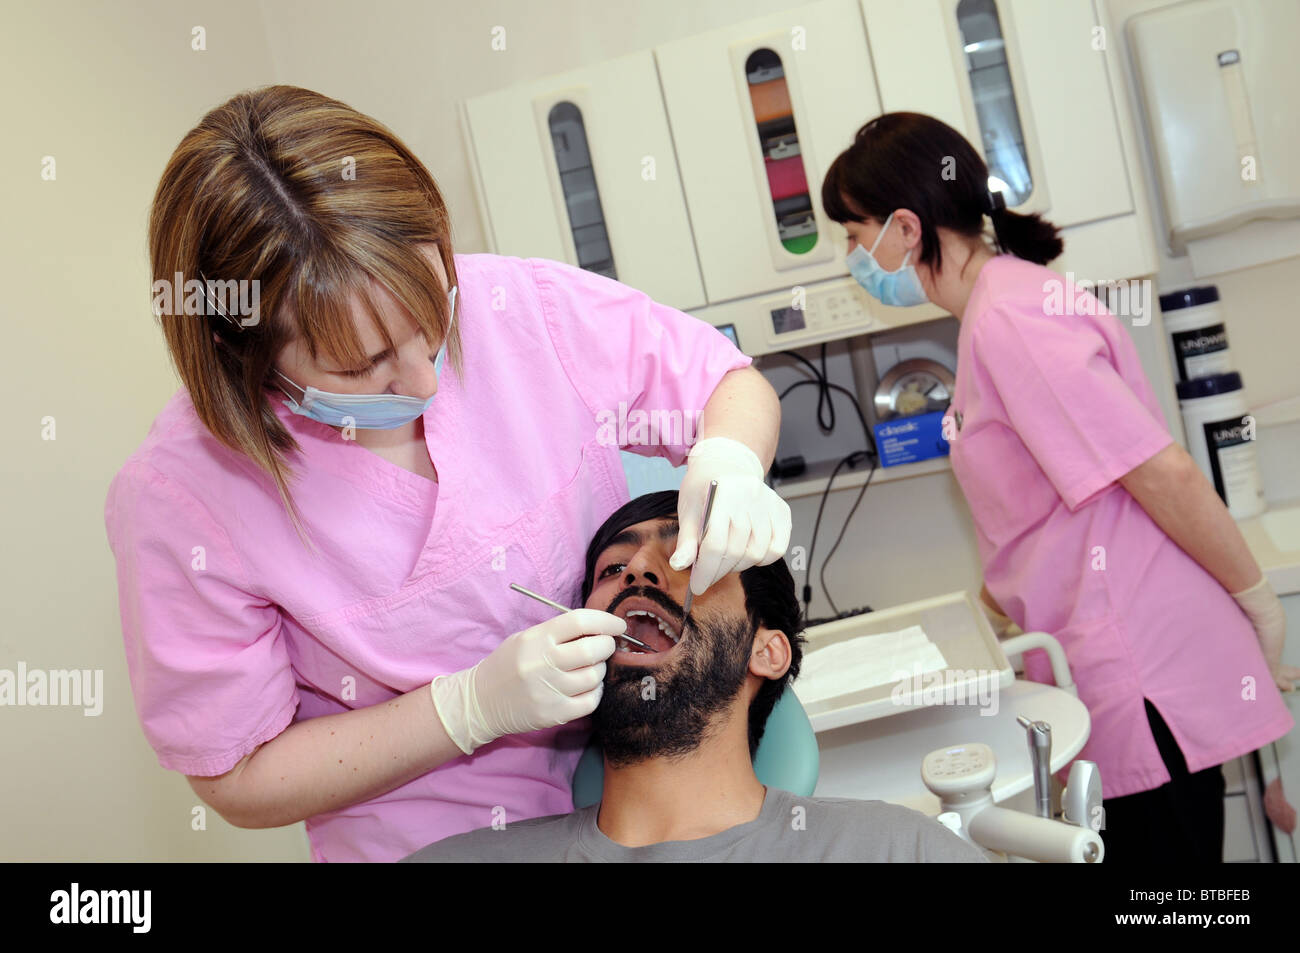 A female dentist examining a male patient's teeth in a dental surgery Stock Photo